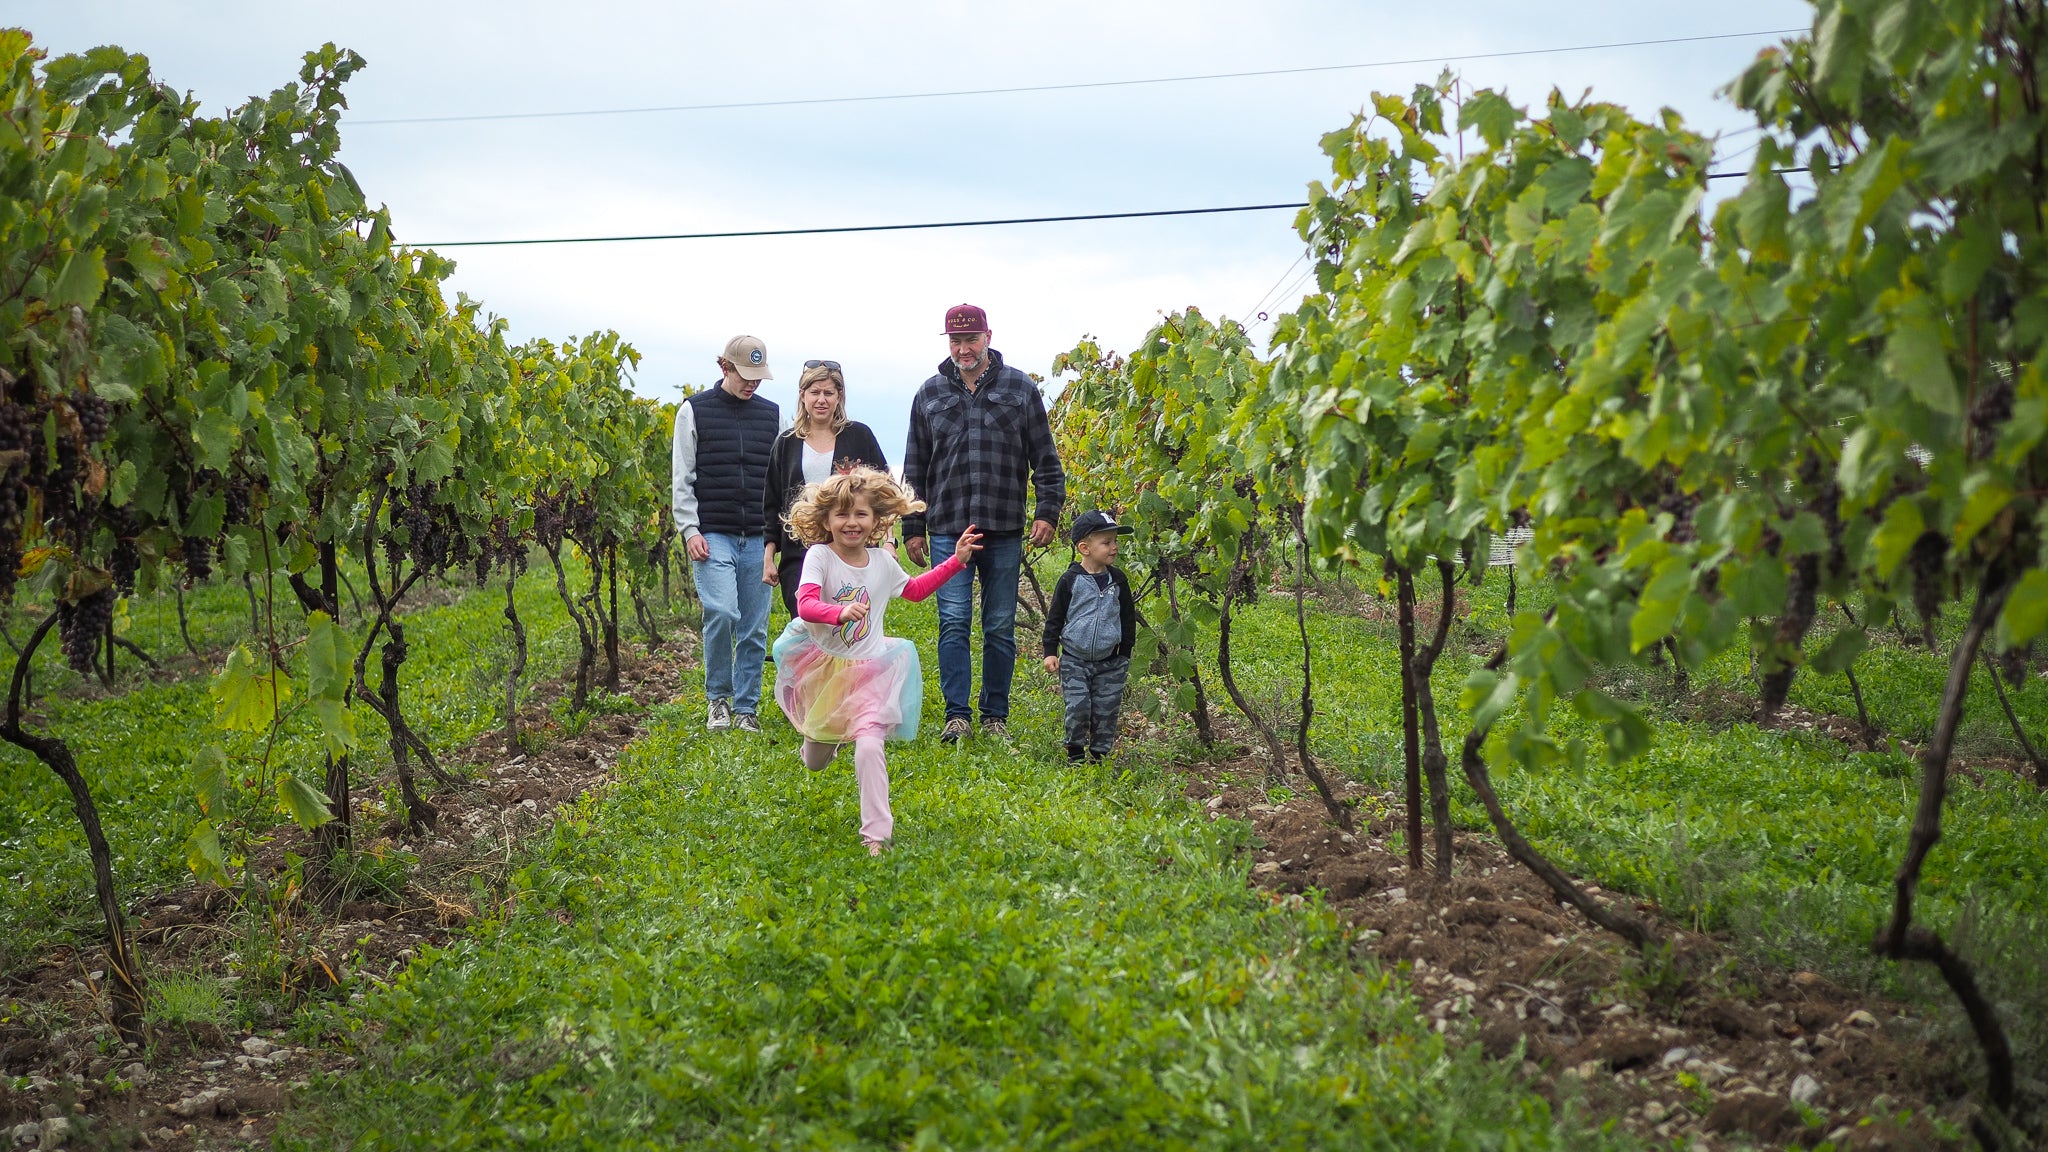 IN THE HEART OF PRINCE EDWARD COUNTY WINE COUNTRY